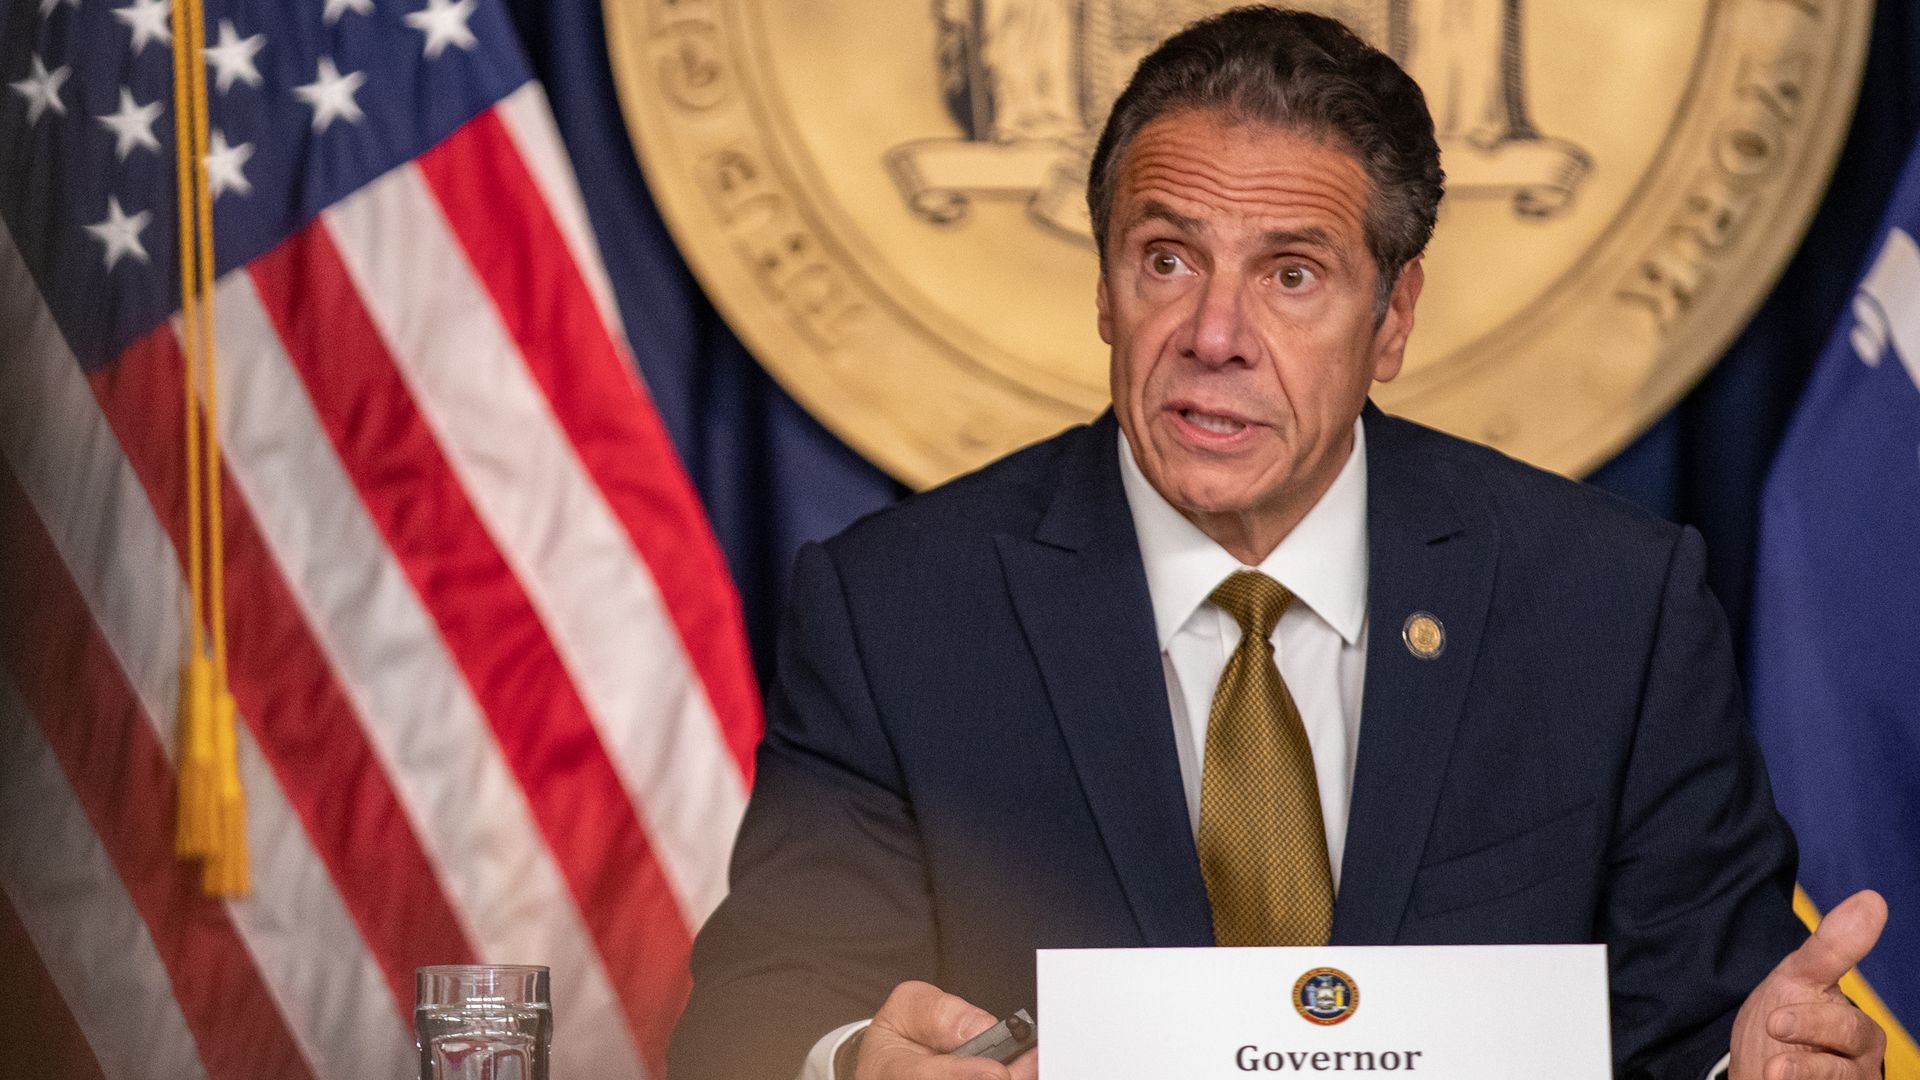 Andrew Cuomo, governor of New York, speaks during a news conference in New York, U.S., on Monday, Oct. 5